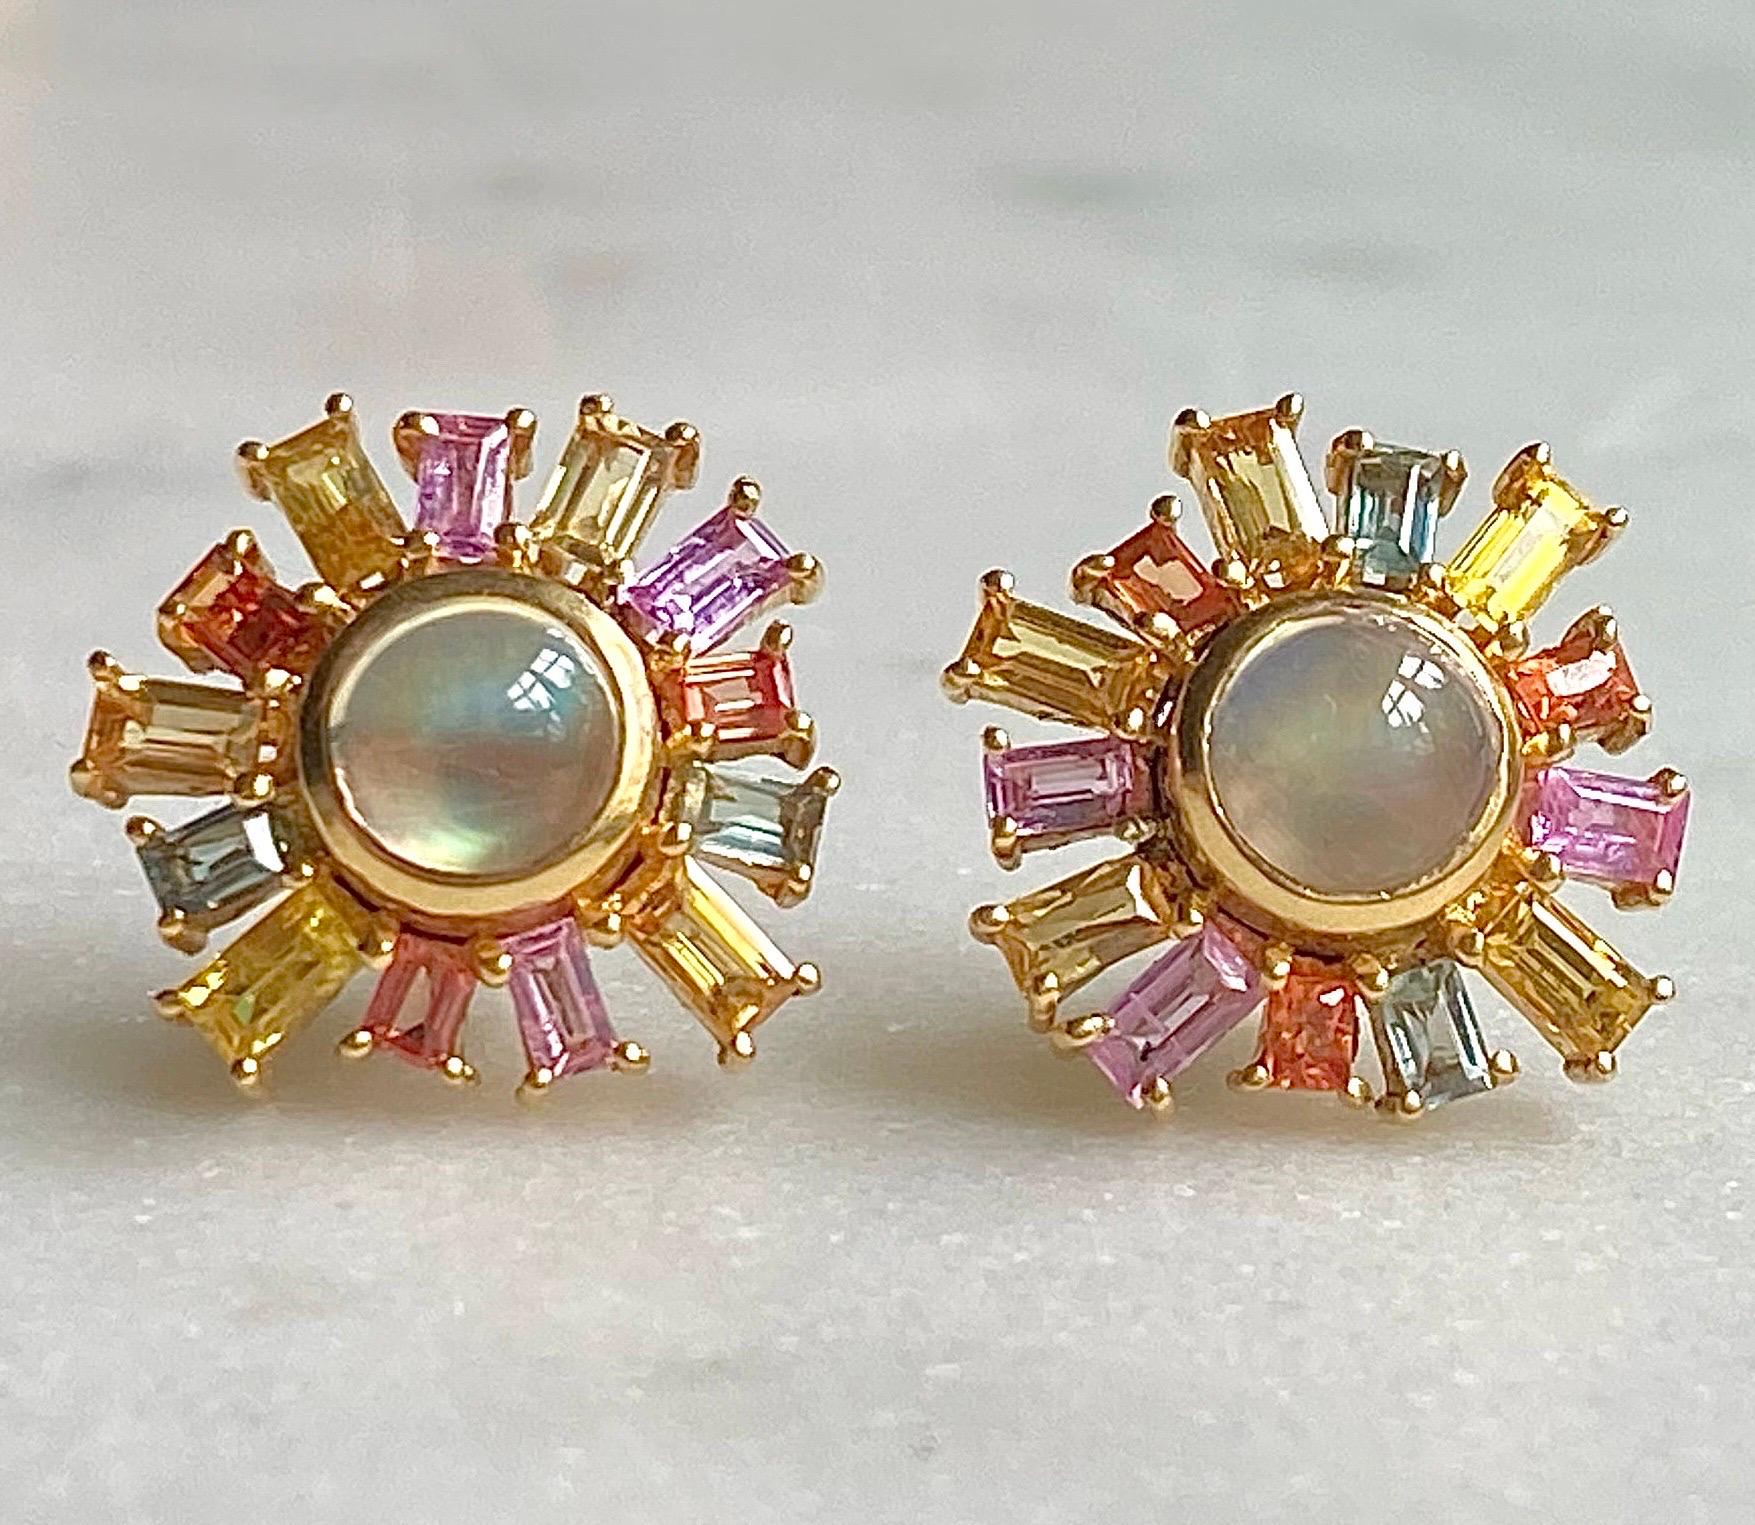 These rainbow moonstone and multicolored sapphire studs are designed by award winning jewelry designer, Lauren Harper. These studs are set in warm 18kt matte Gold and are sure to get noticed. The rainbow moonstone center stones have an otherworldly